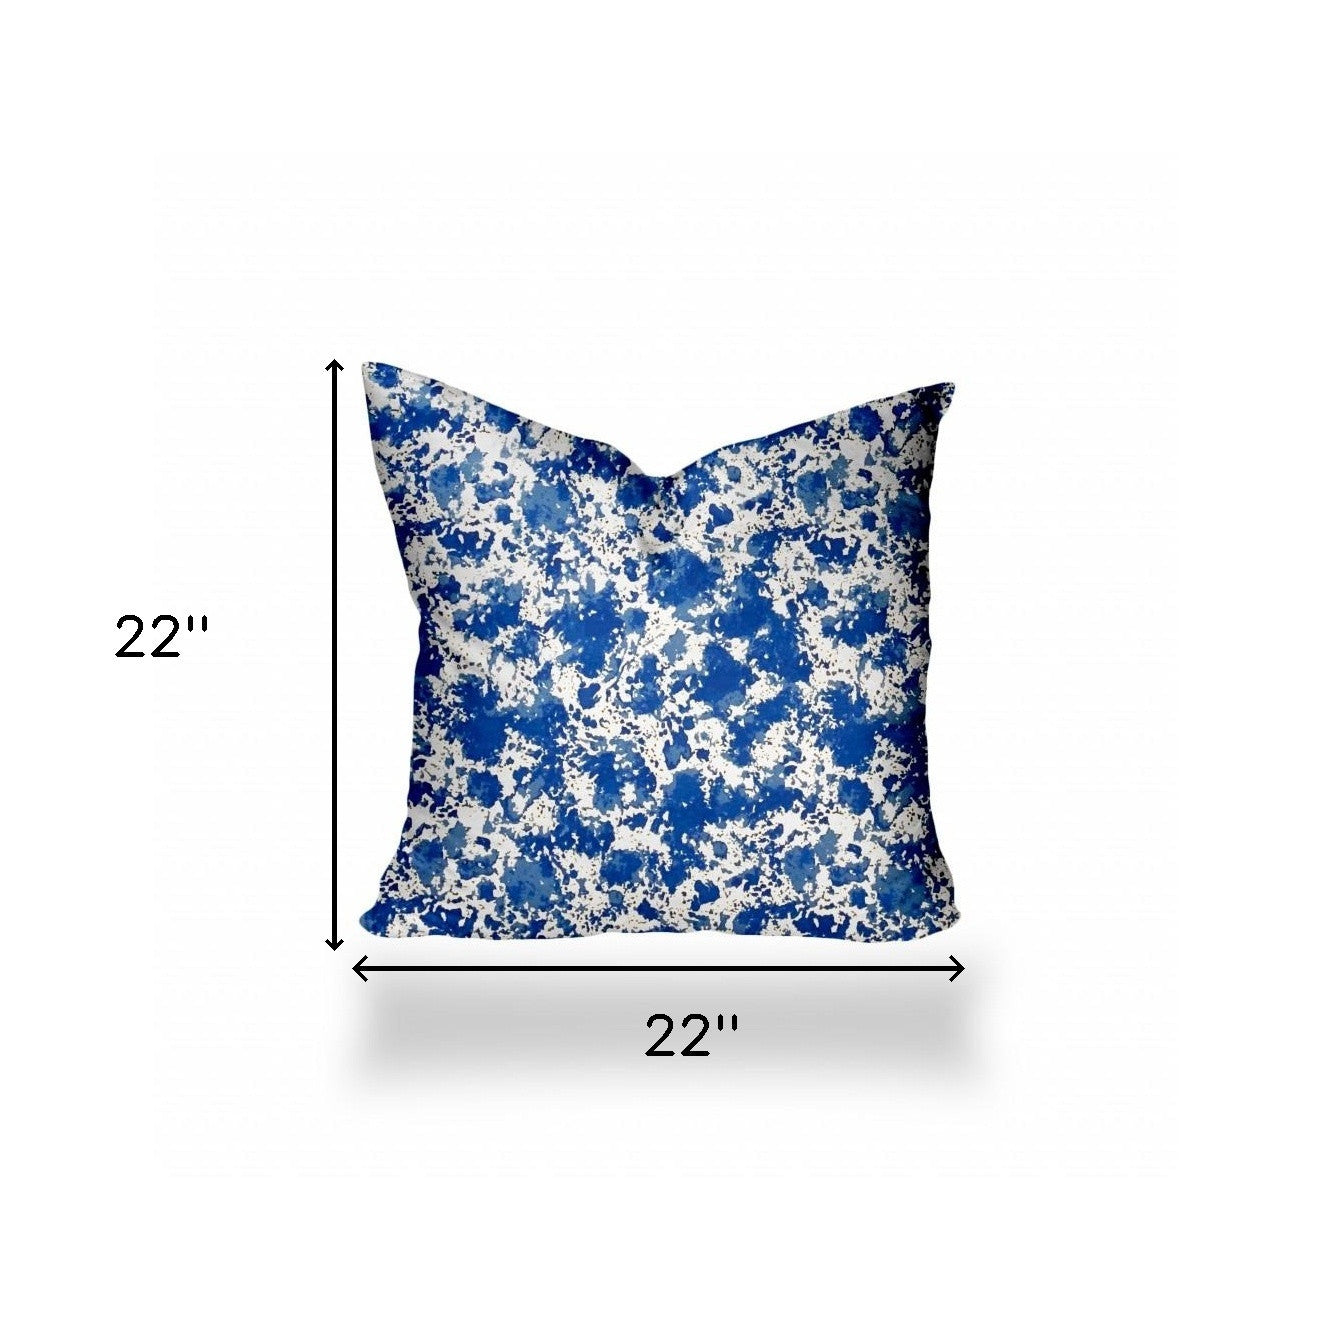 22" X 22" Blue And White Enveloped Coastal Throw Indoor Outdoor Pillow Cover